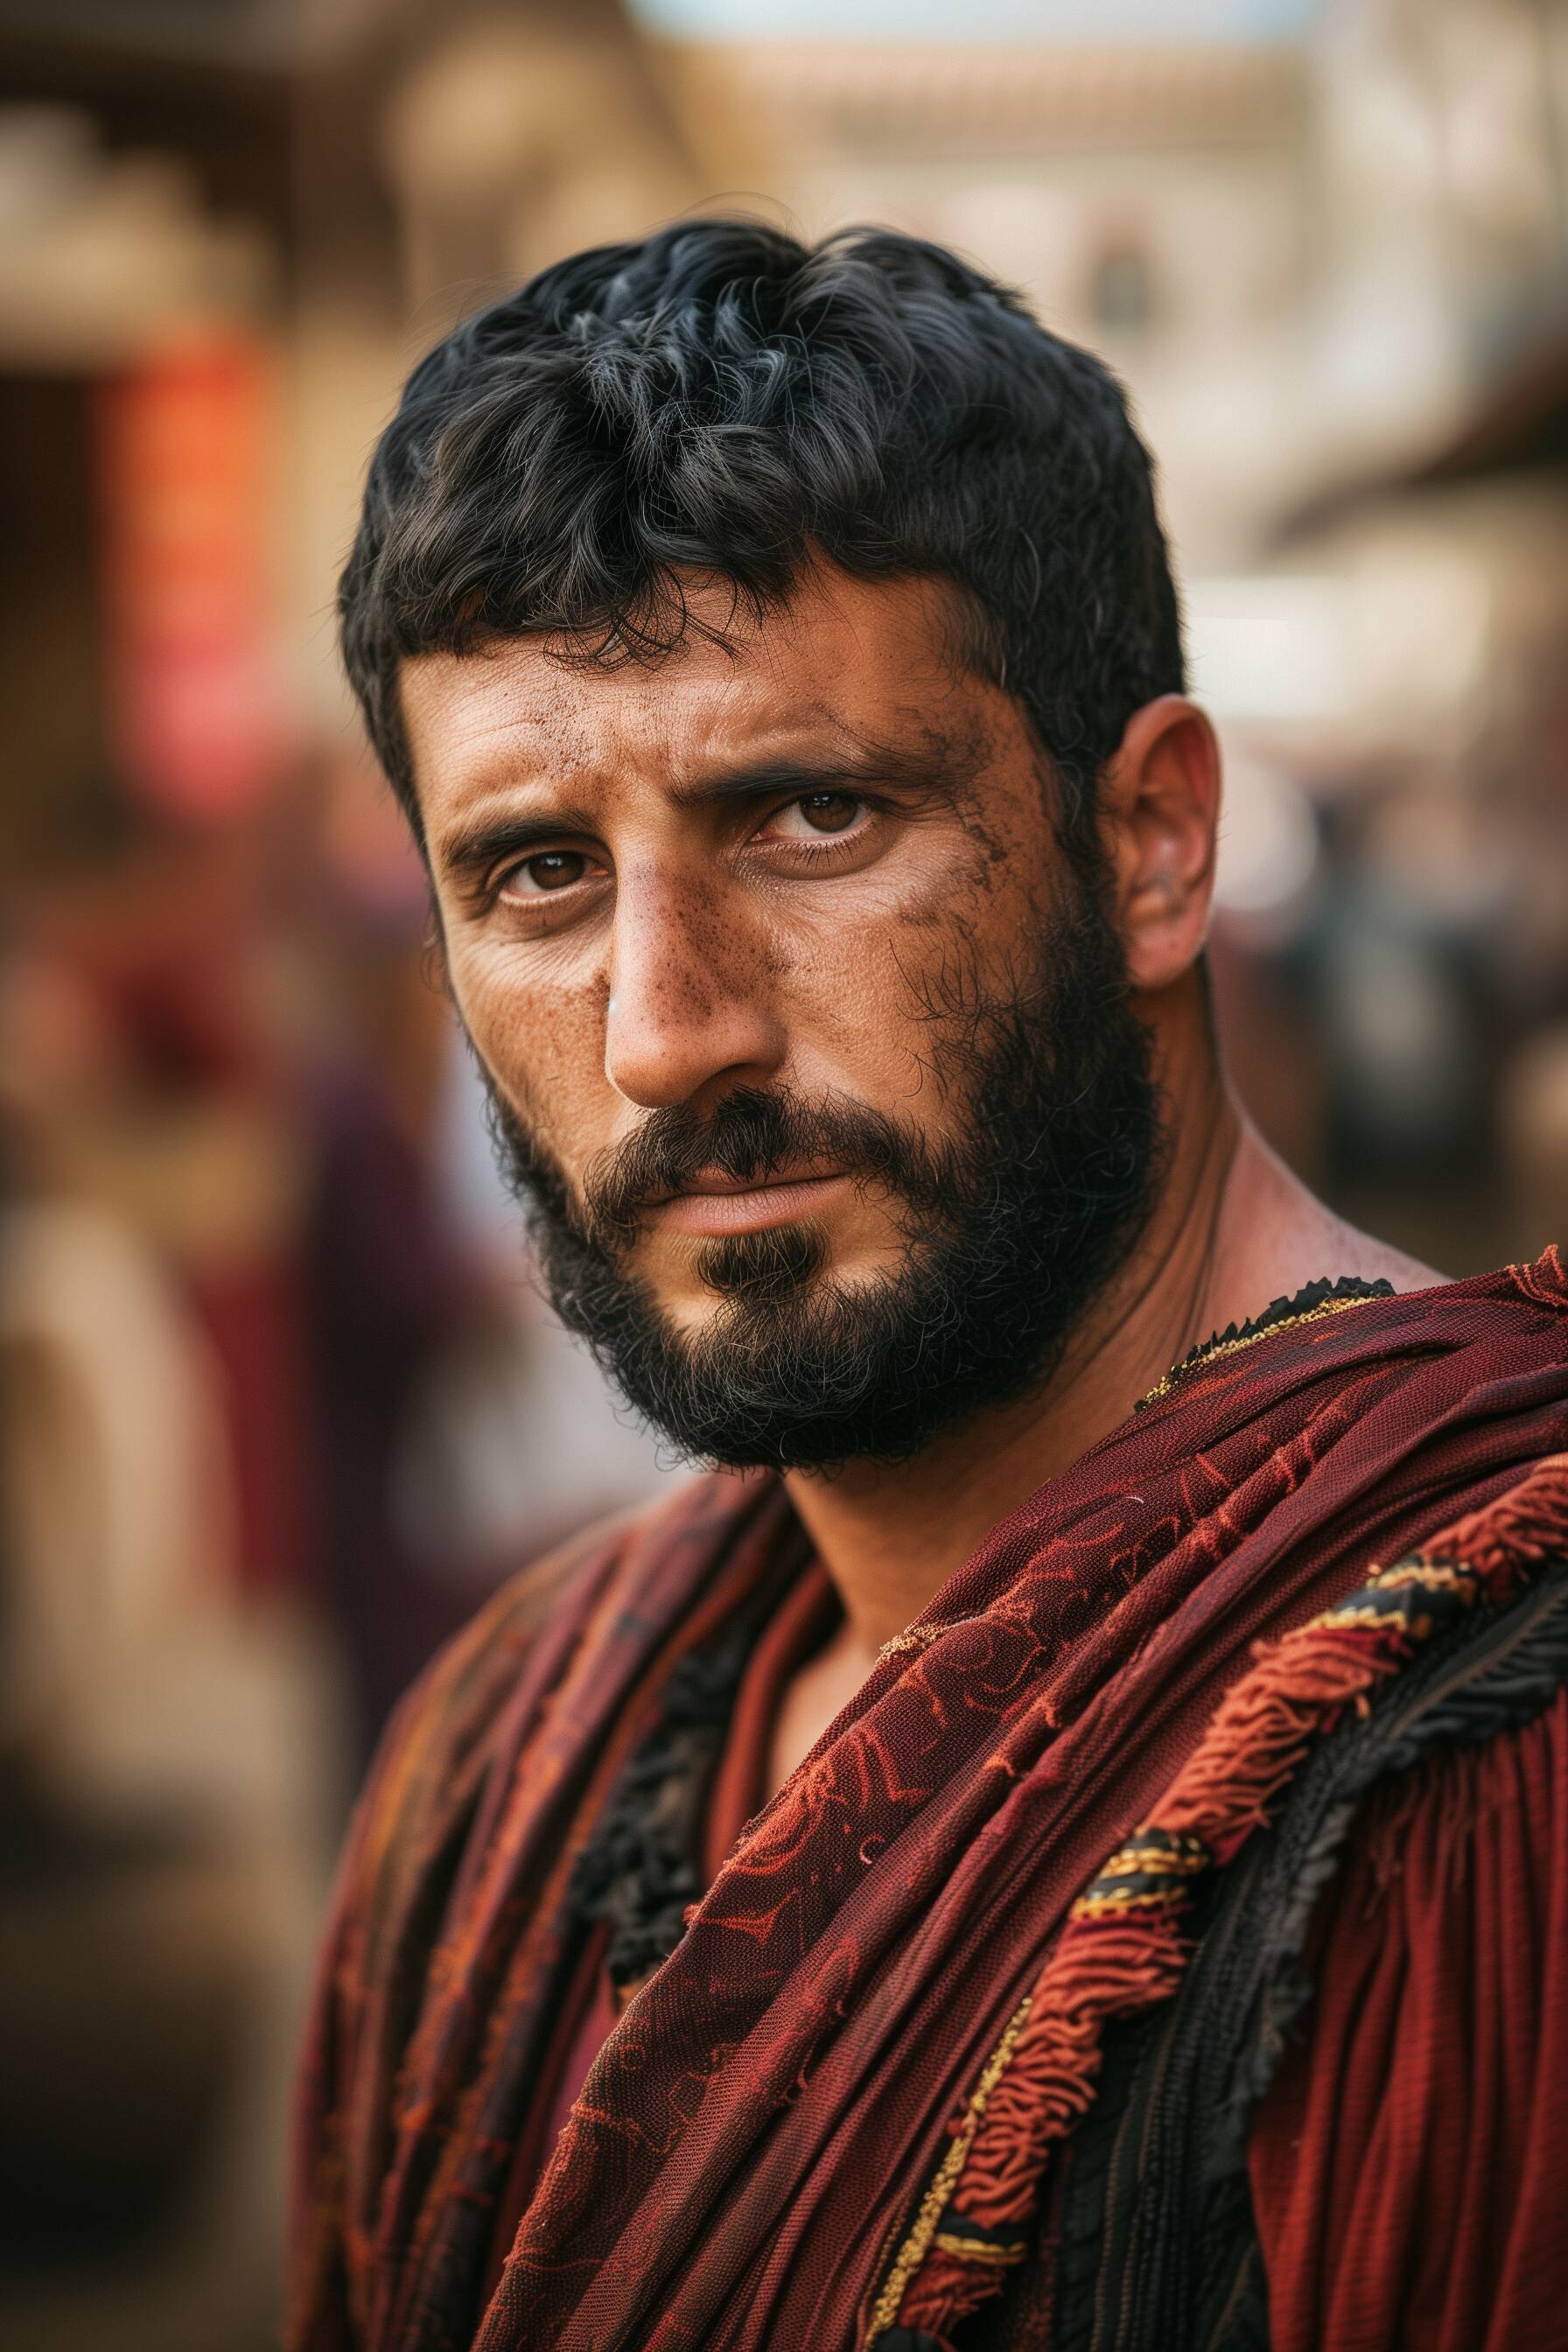 A possible portrait photo of Apollodorus of Damascus, during the time of Trajan’s market construction